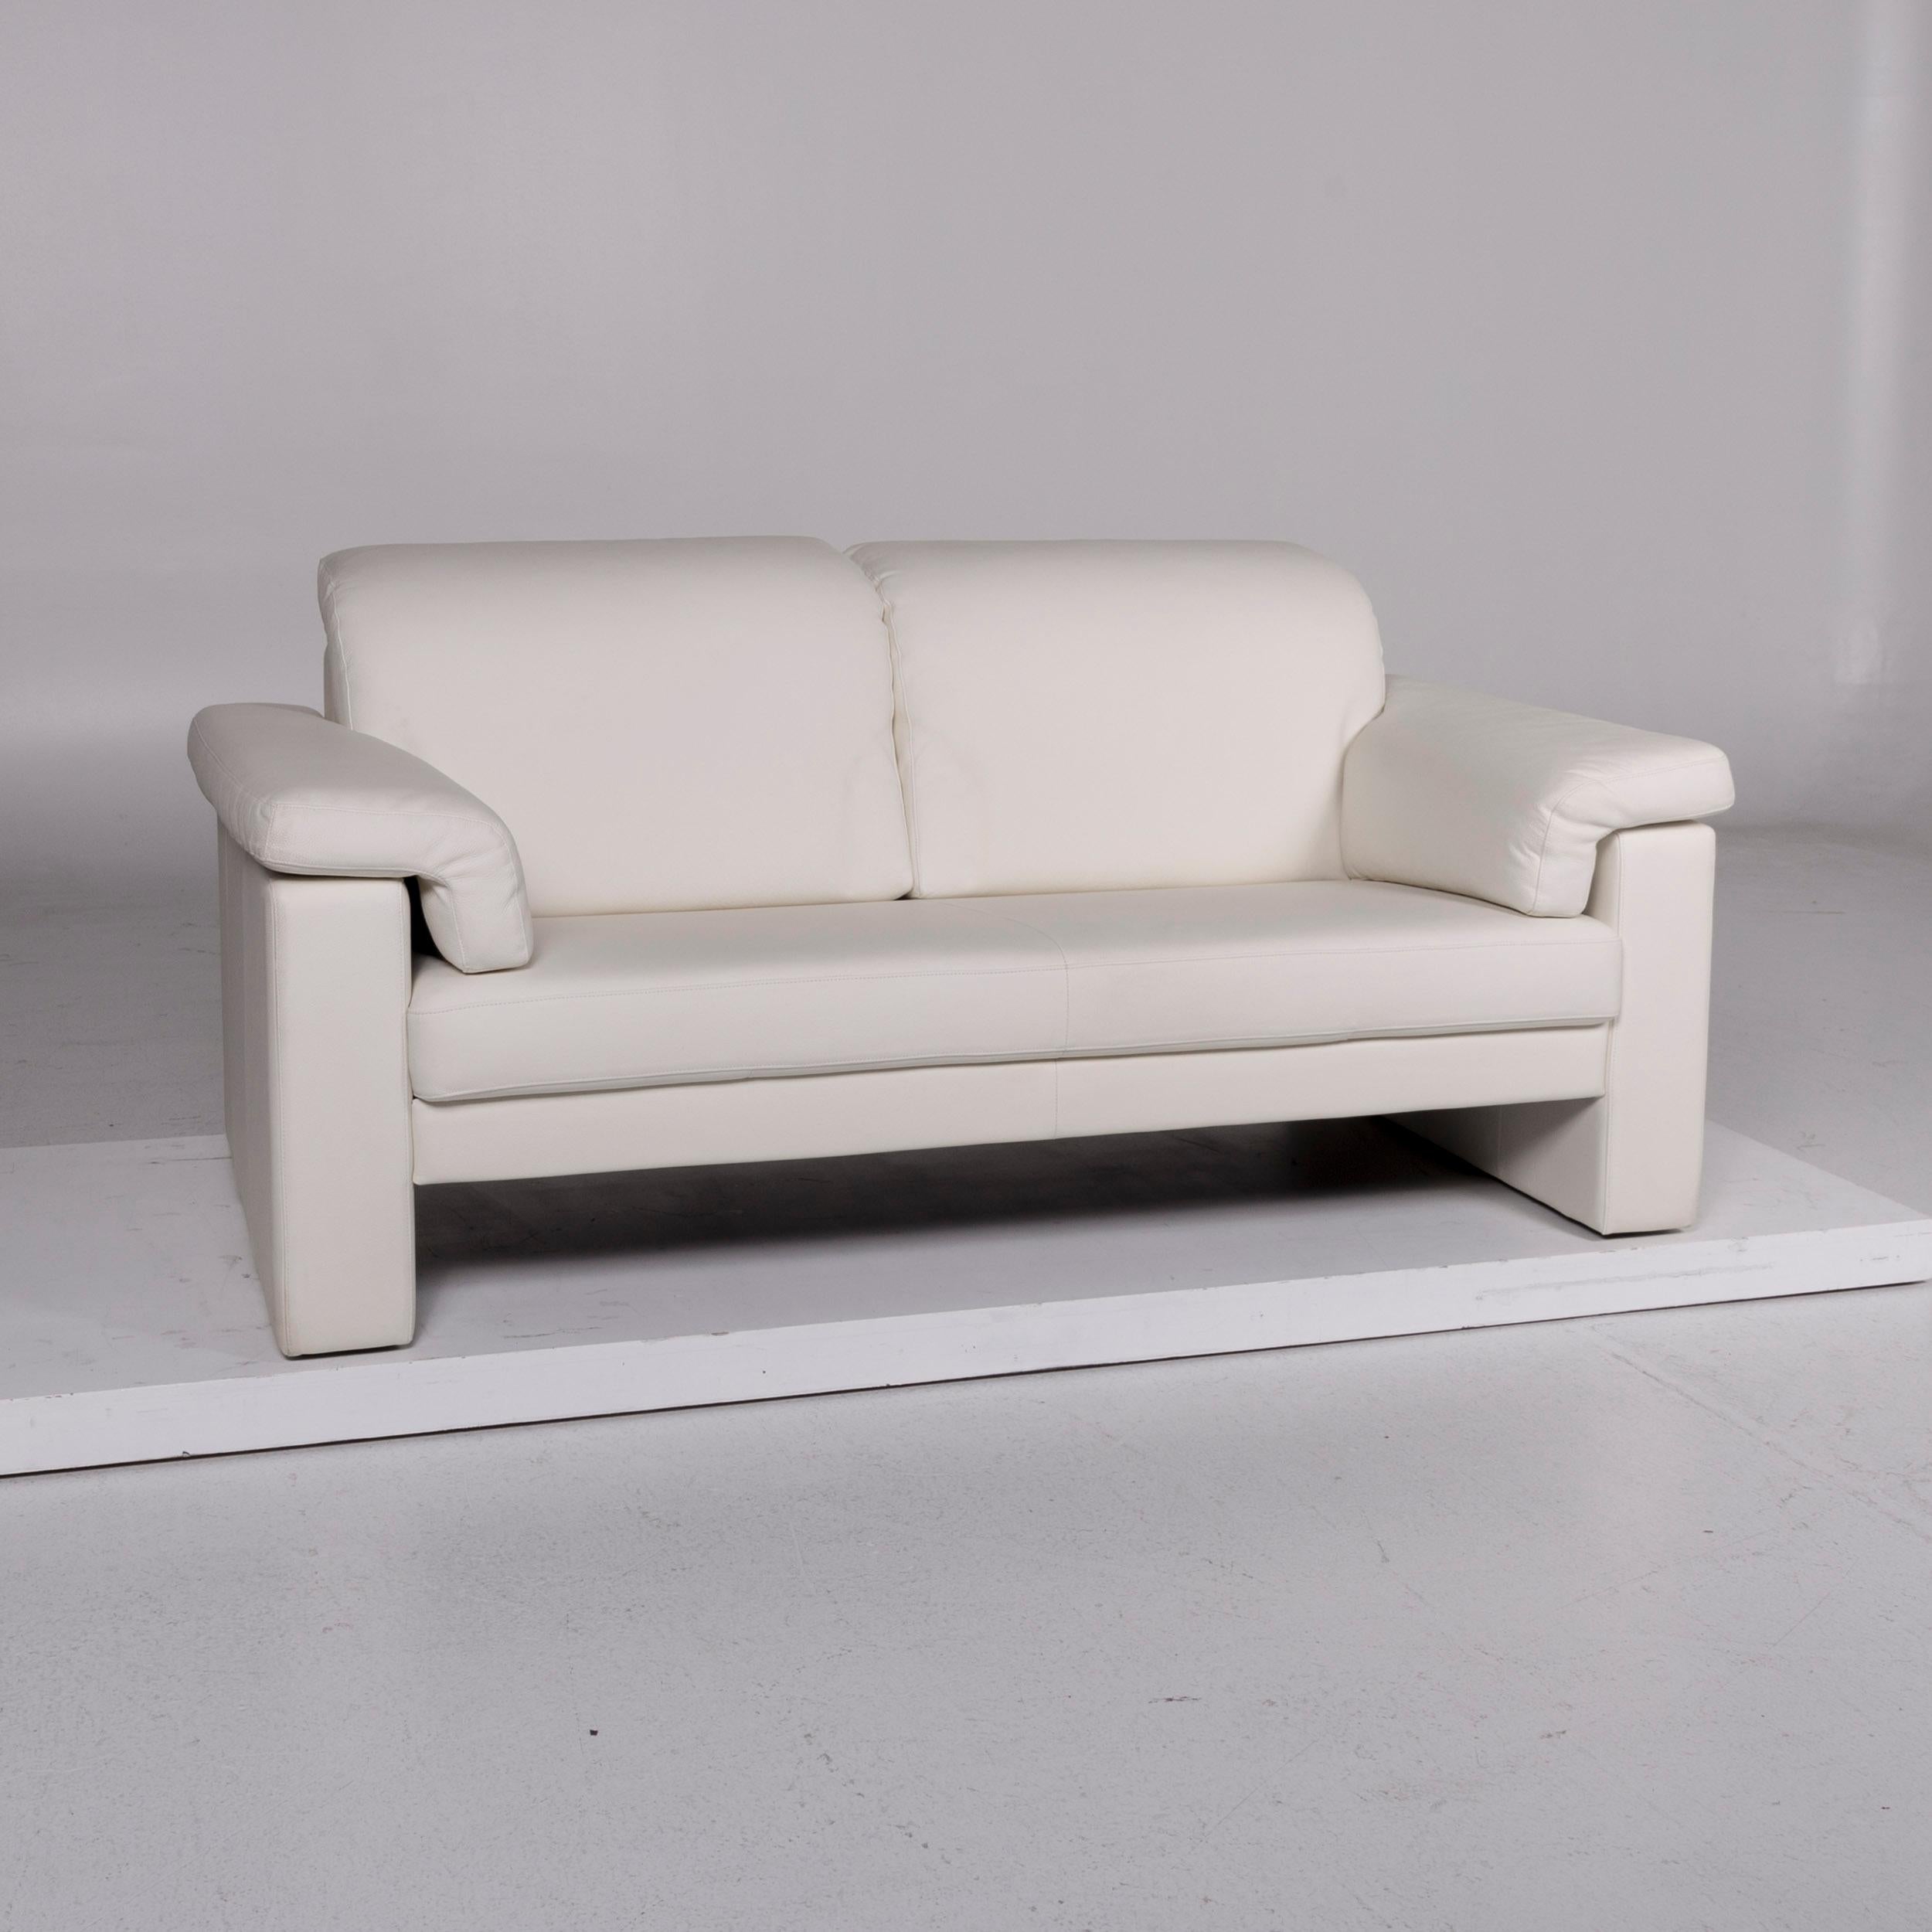 We bring to you a Rolf Benz leather sofa set white 2 two-seat couch.

 Product measurements in centimeters:
 
Depth 98
Width 179
Height 83
Seat-height 42
Rest-height 62
Seat-depth 57
Seat-width 122
Back-height 42.
 